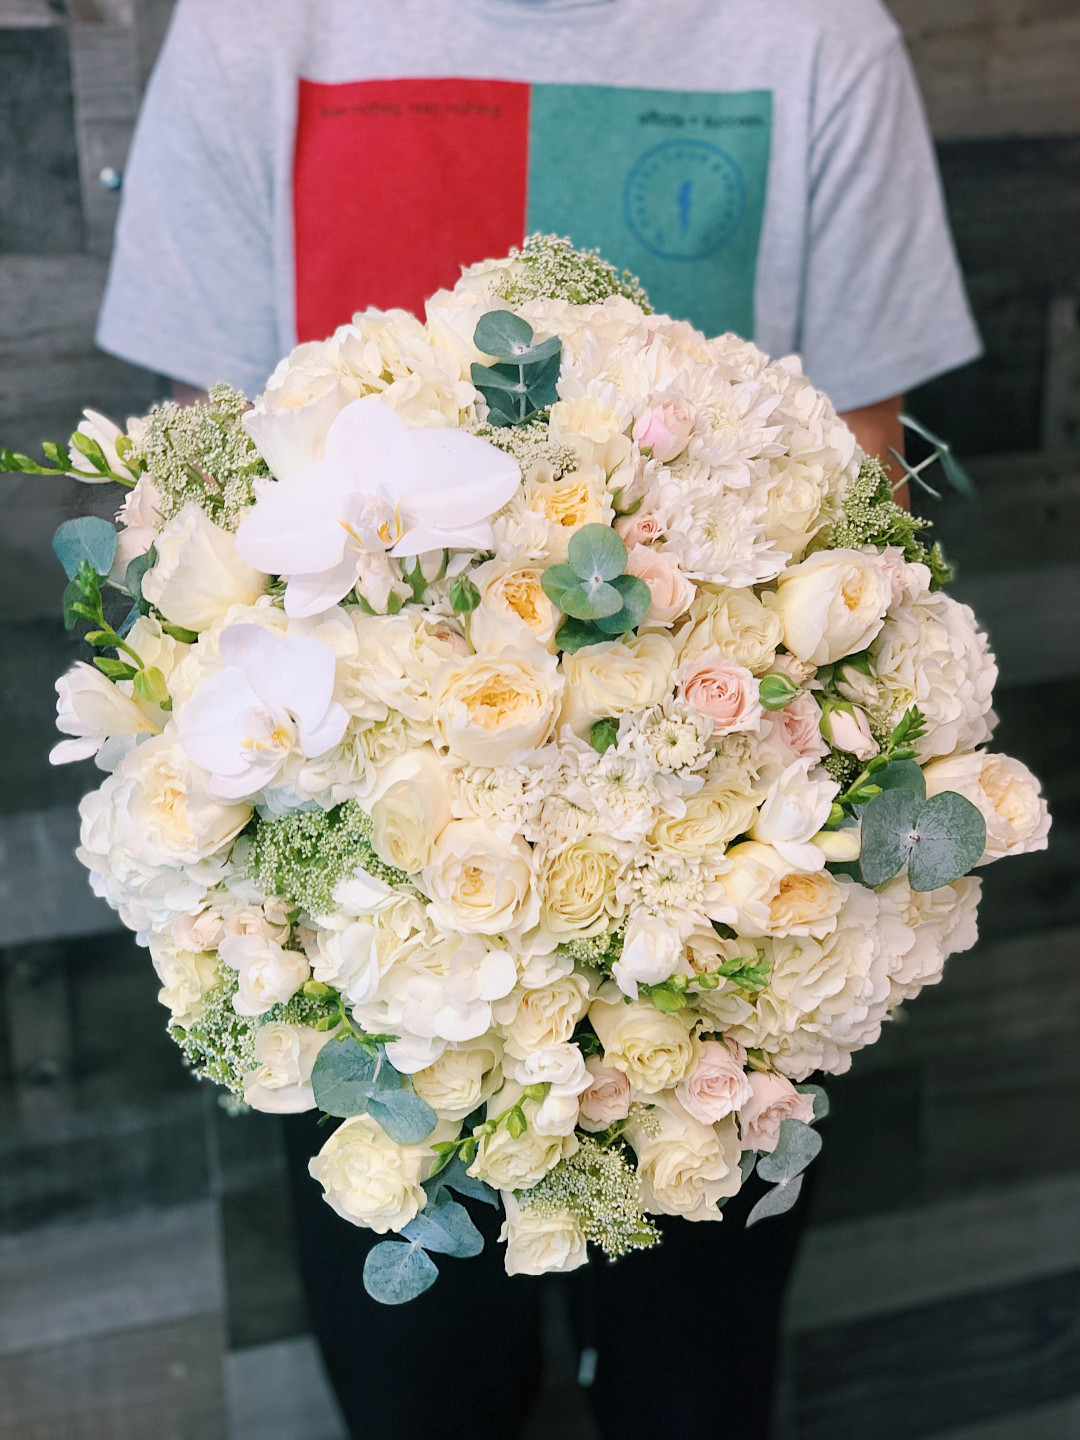 Purity Hand-Tied Flower Bouquet